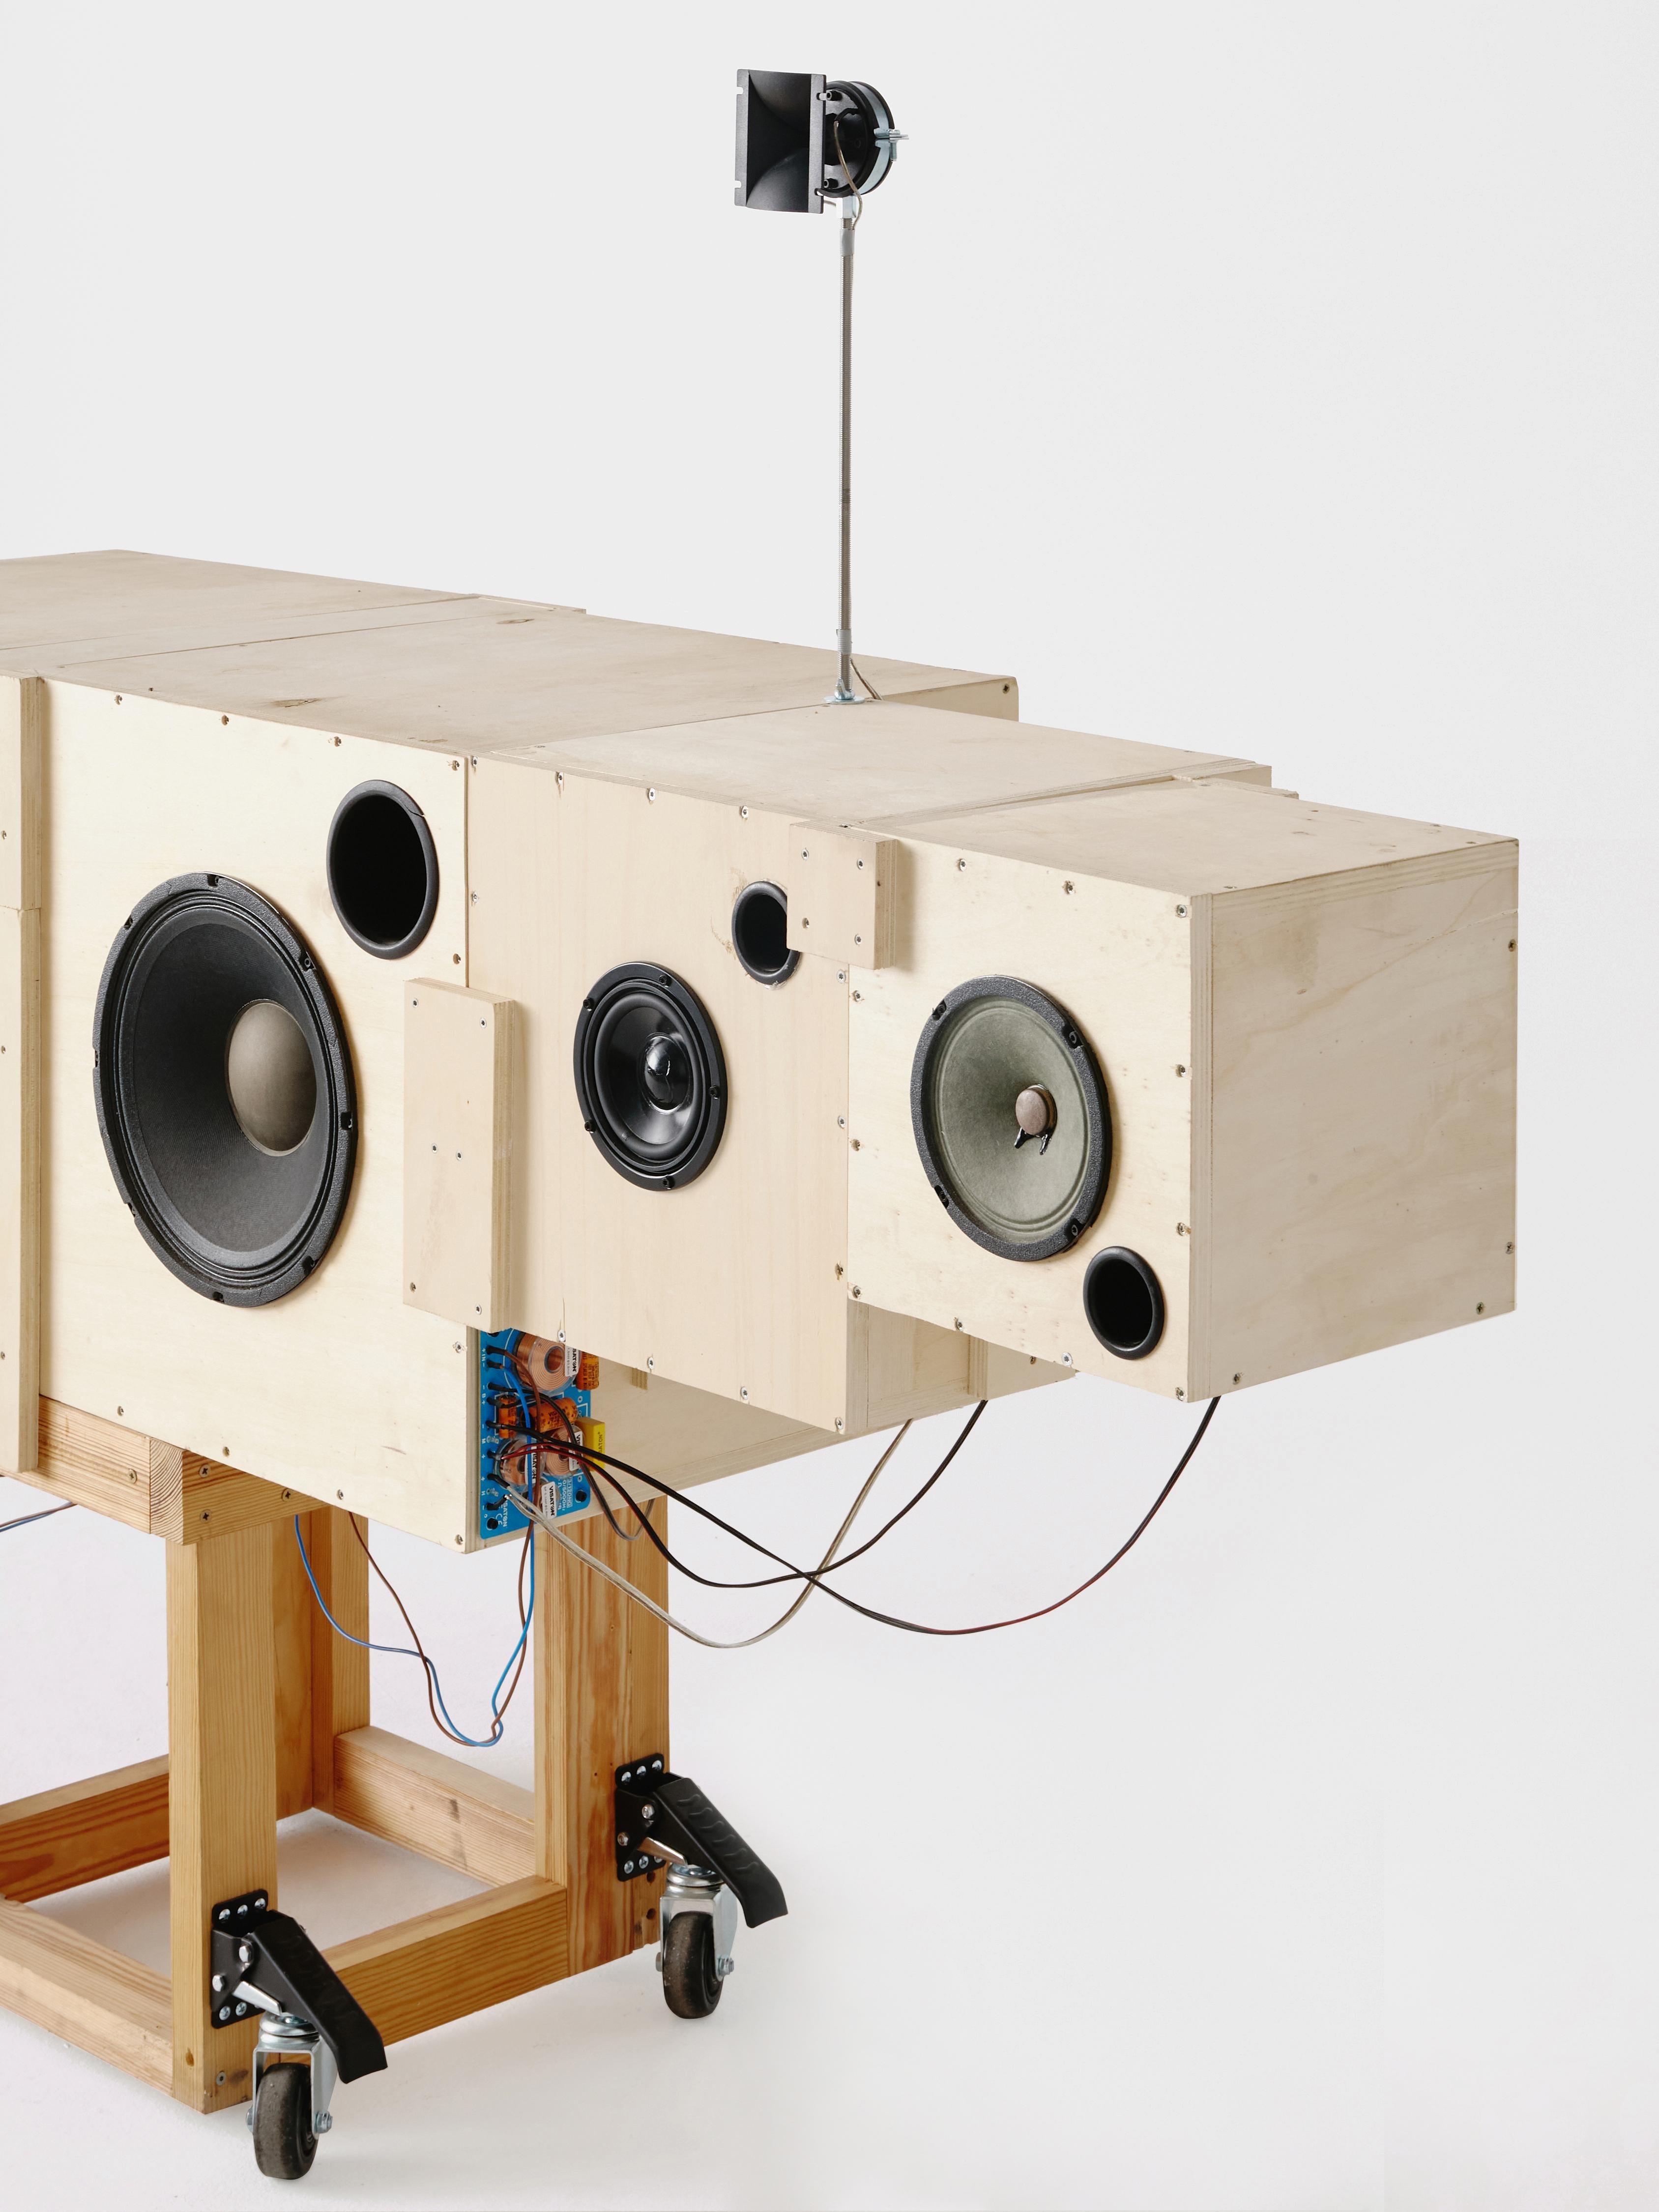 Sound System 1 is a piece that forms part of the collection SS. The reclaimed plywood originates from the 2018 Logroño Concéntrico Festival installation, Subterránea, which was a skate ramp that featured a sound system. After the festival period, it